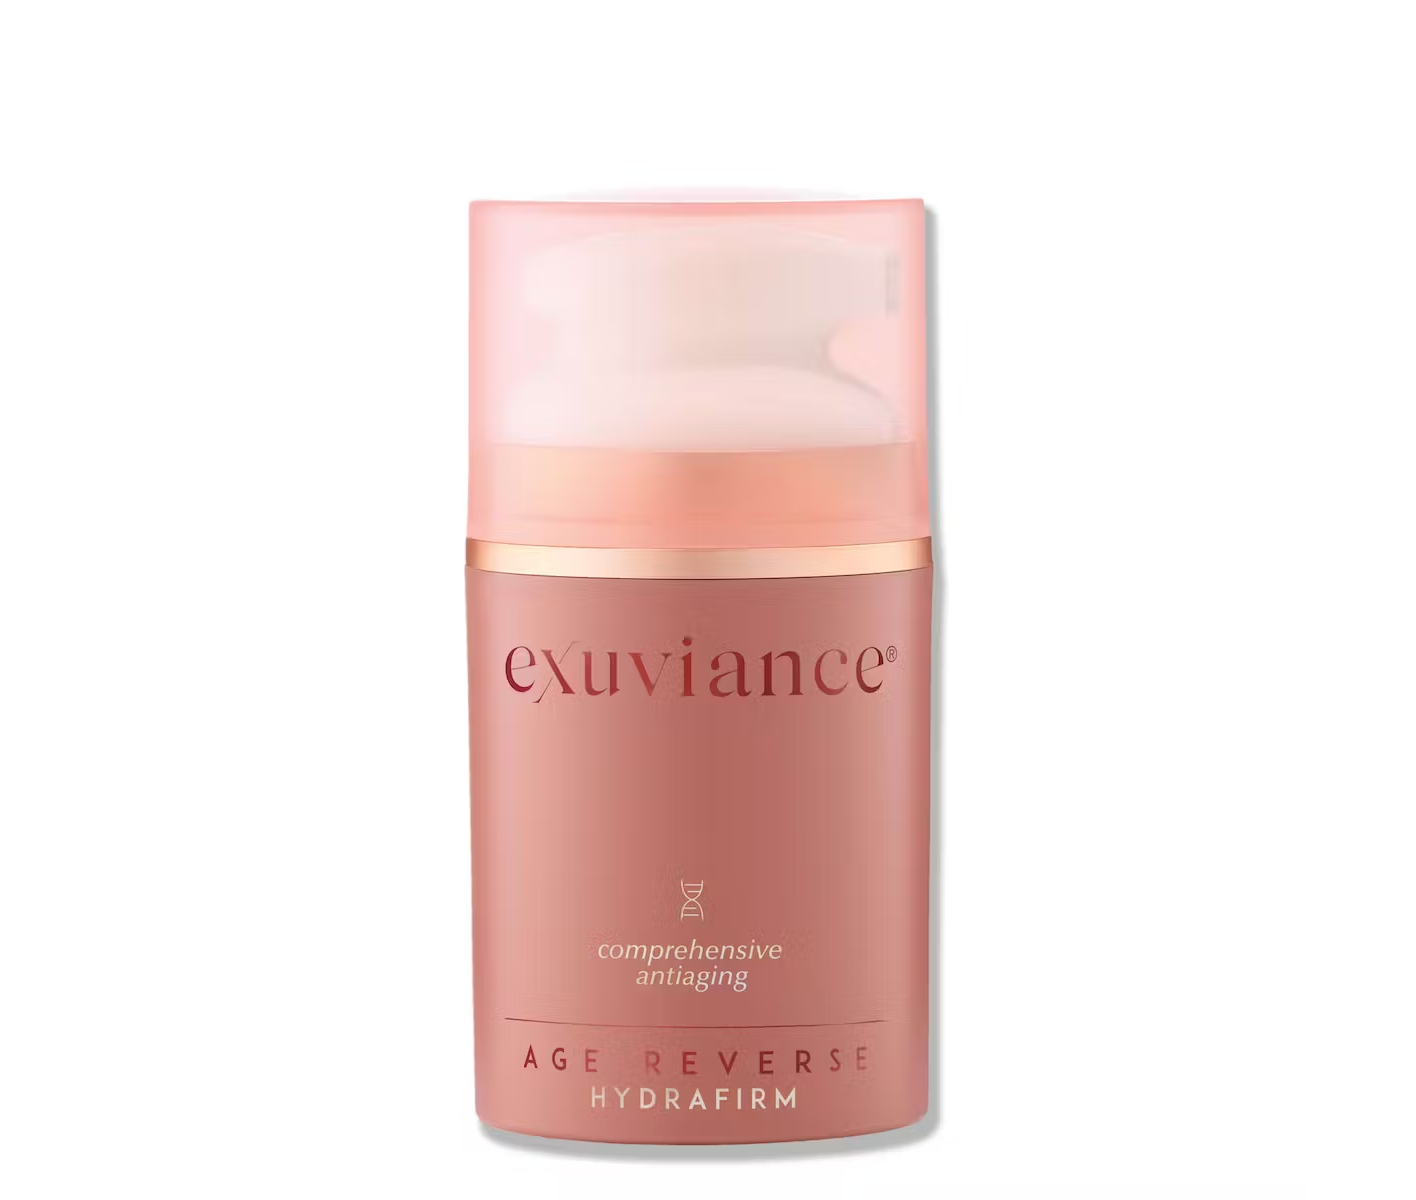 Se Exuviance AGE REVERSE Hydrafirm hos Staybeautiful